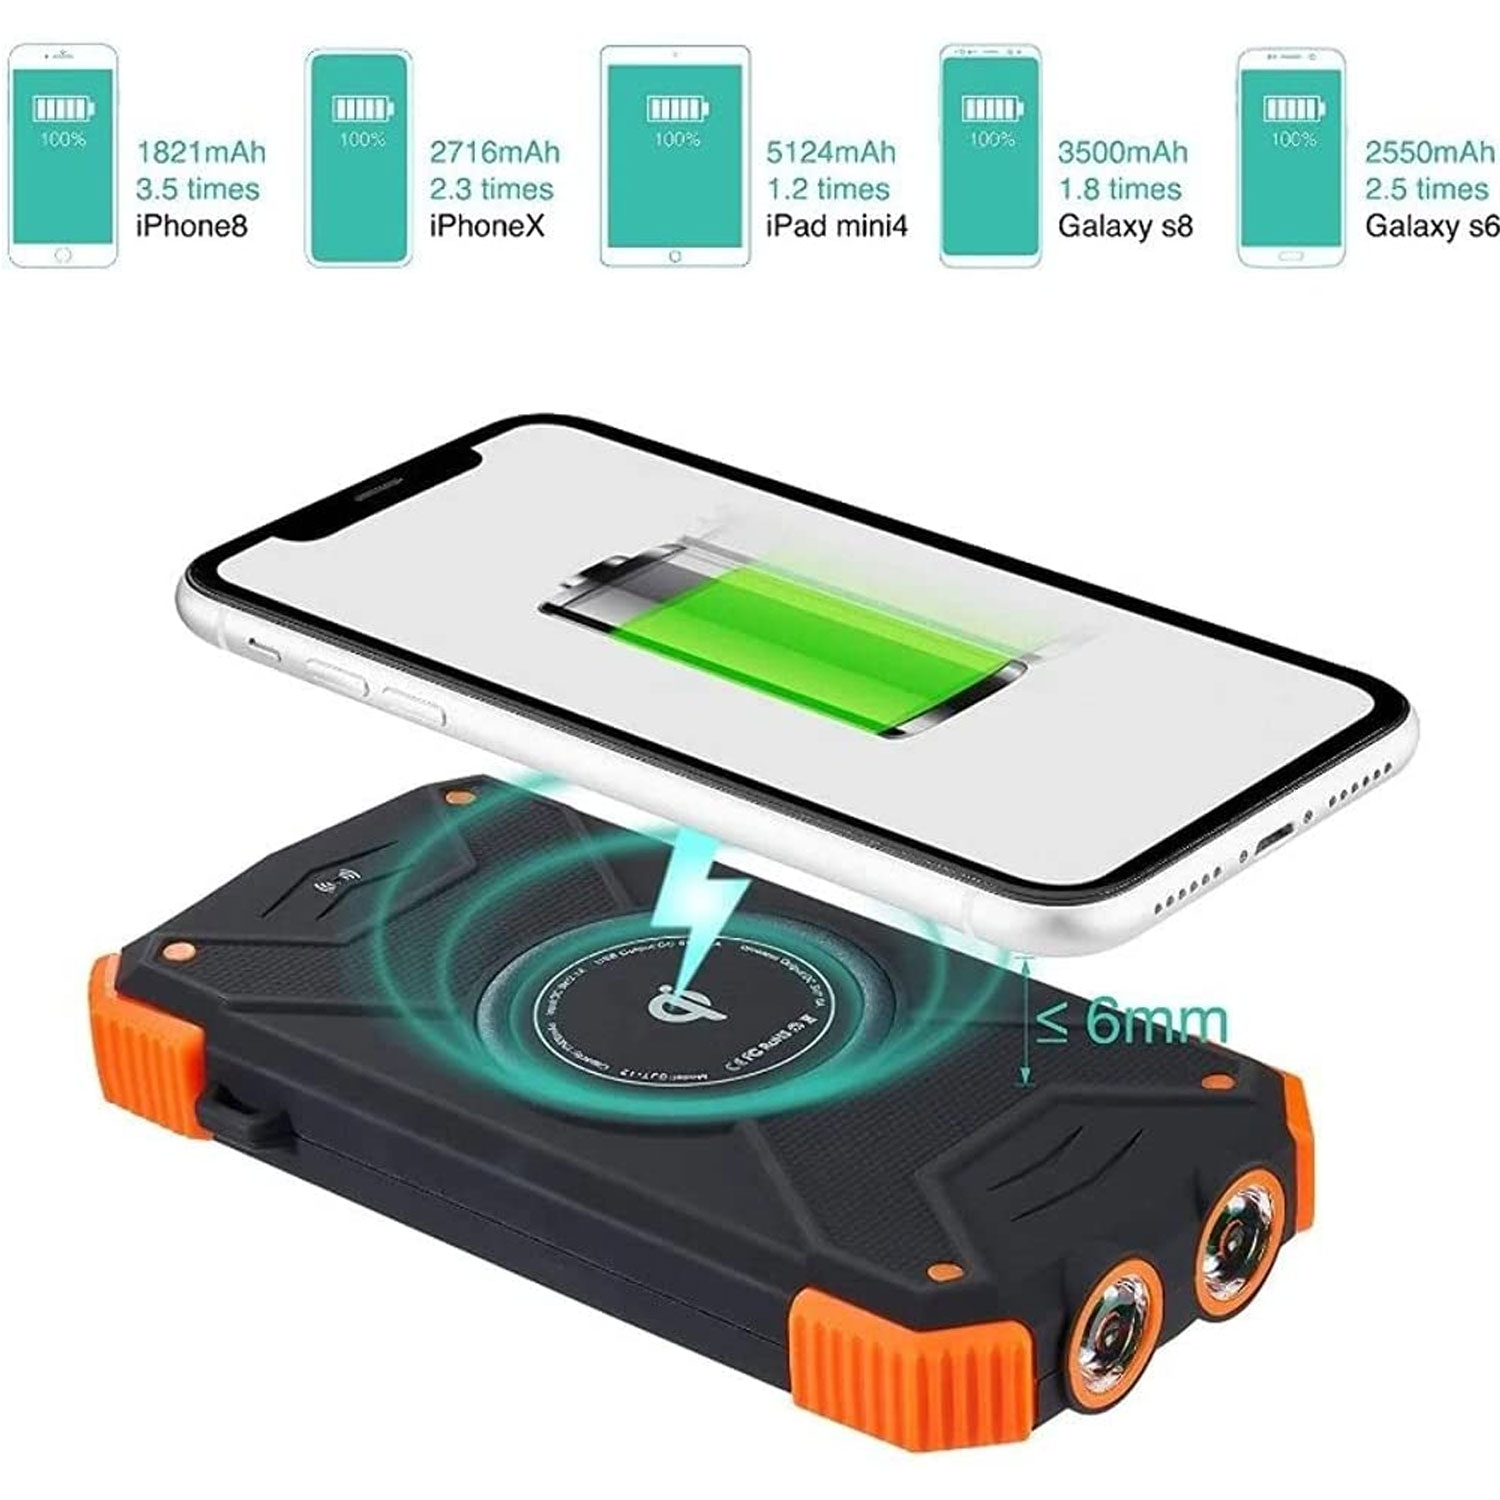 Solar Juice Touch Solar Powered Battery Pack With Qi Charging Pad - 2 Pack